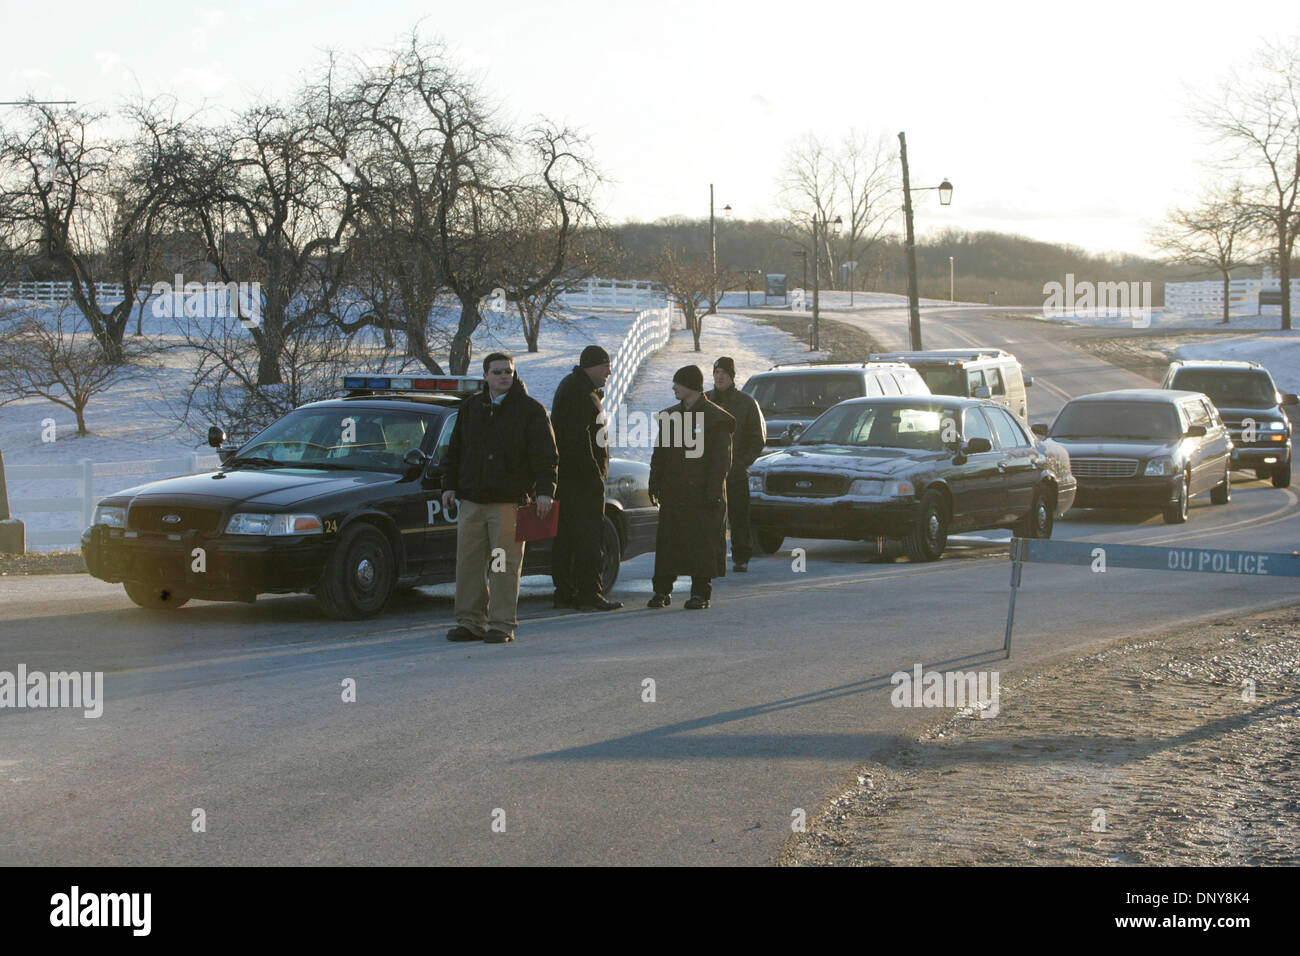 Jan 18, 2006; Rochester Hills, MI, USA; (FILE PHOTO: Exact Date Jan 14, 2006) Guests arrive for the wedding of rapper EMINEM and Kim Mathers on the campus of Oakland University near Detroit, MI. The couple were married for the first time in June, 1999 and divorced in October, 2001. Mandatory Credit: Photo by Nate Brunton/ZUMA Press. (©) Copyright 2006 by Nate Brunton Stock Photo